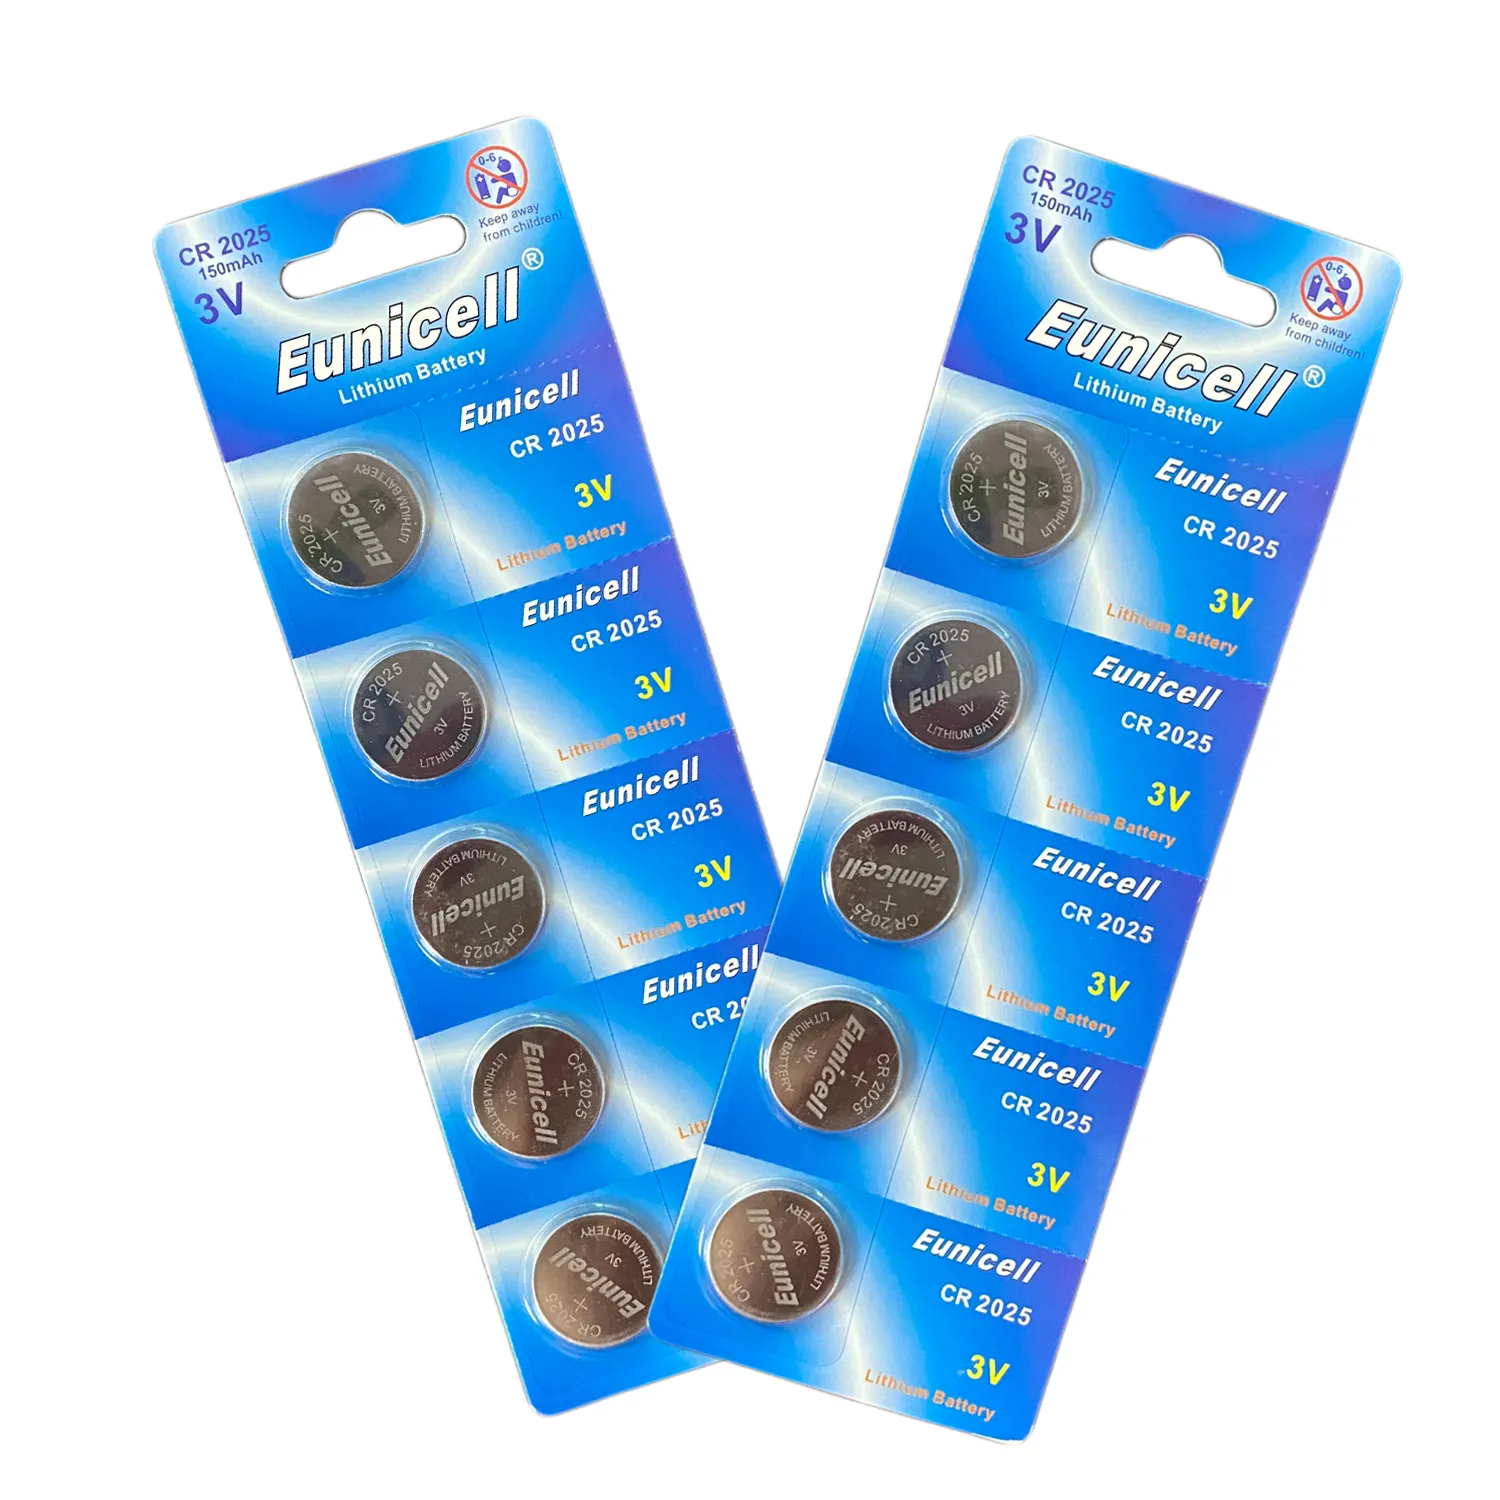 batteries 3v non rechargeable CR2025 lithium button cell batteries for Watch Calculator with Child Baby Safety